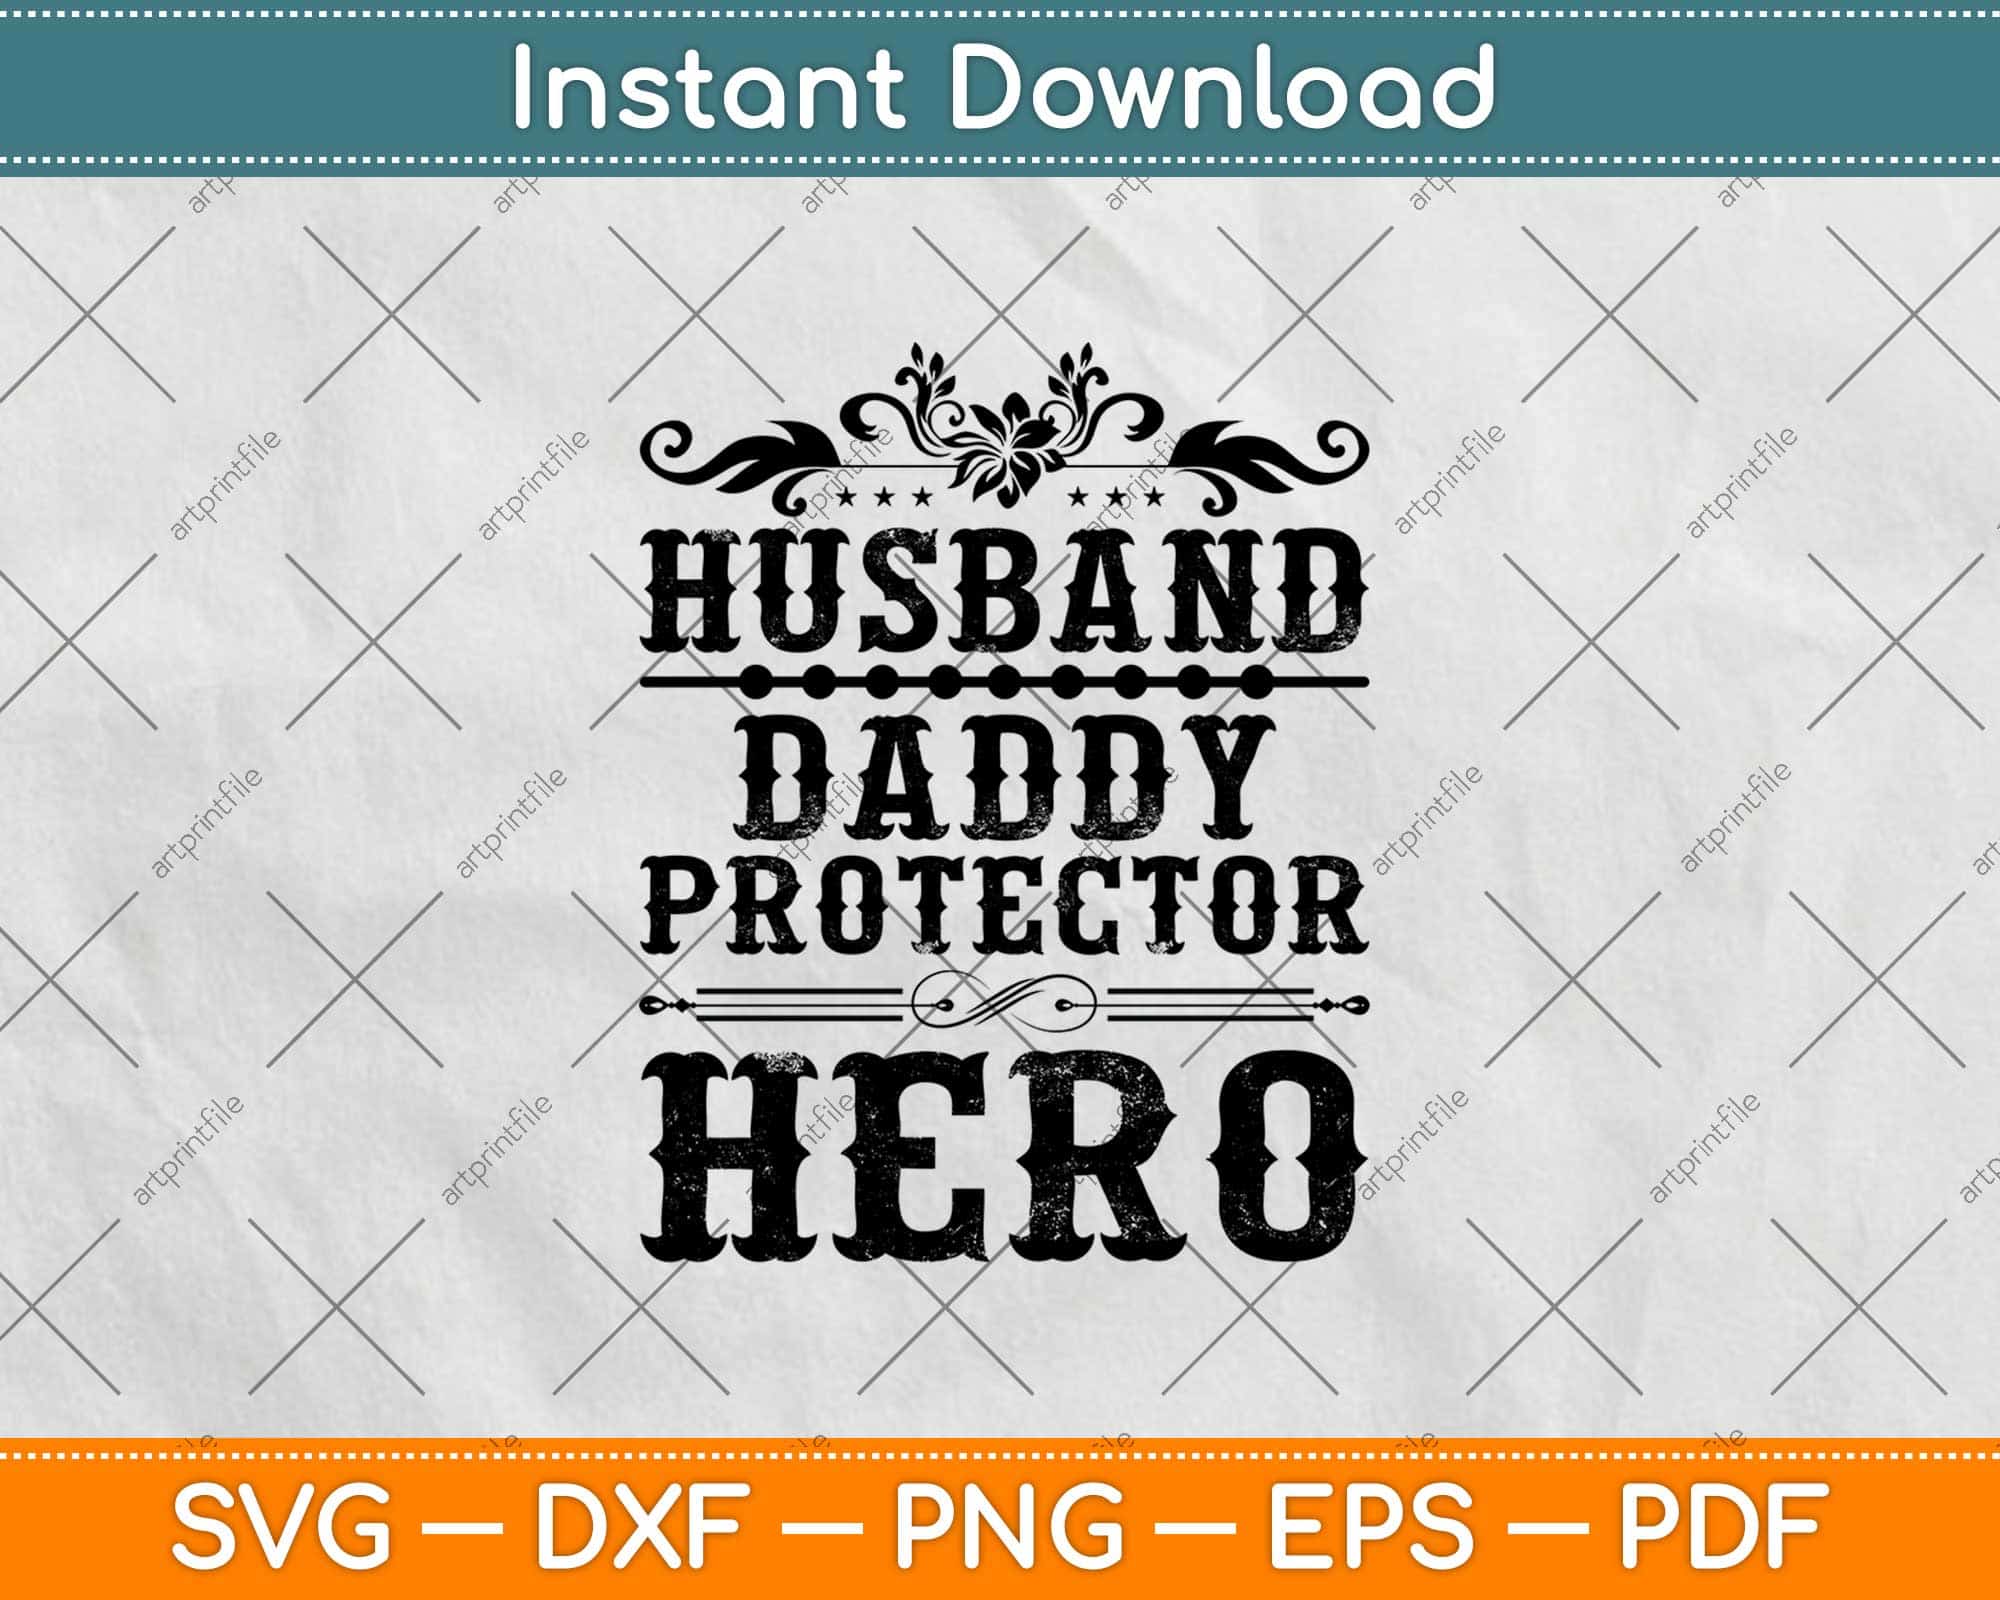 Download Husband Daddy Protector Hero Fathers Day Svg Png Dxf Files Artprintfile